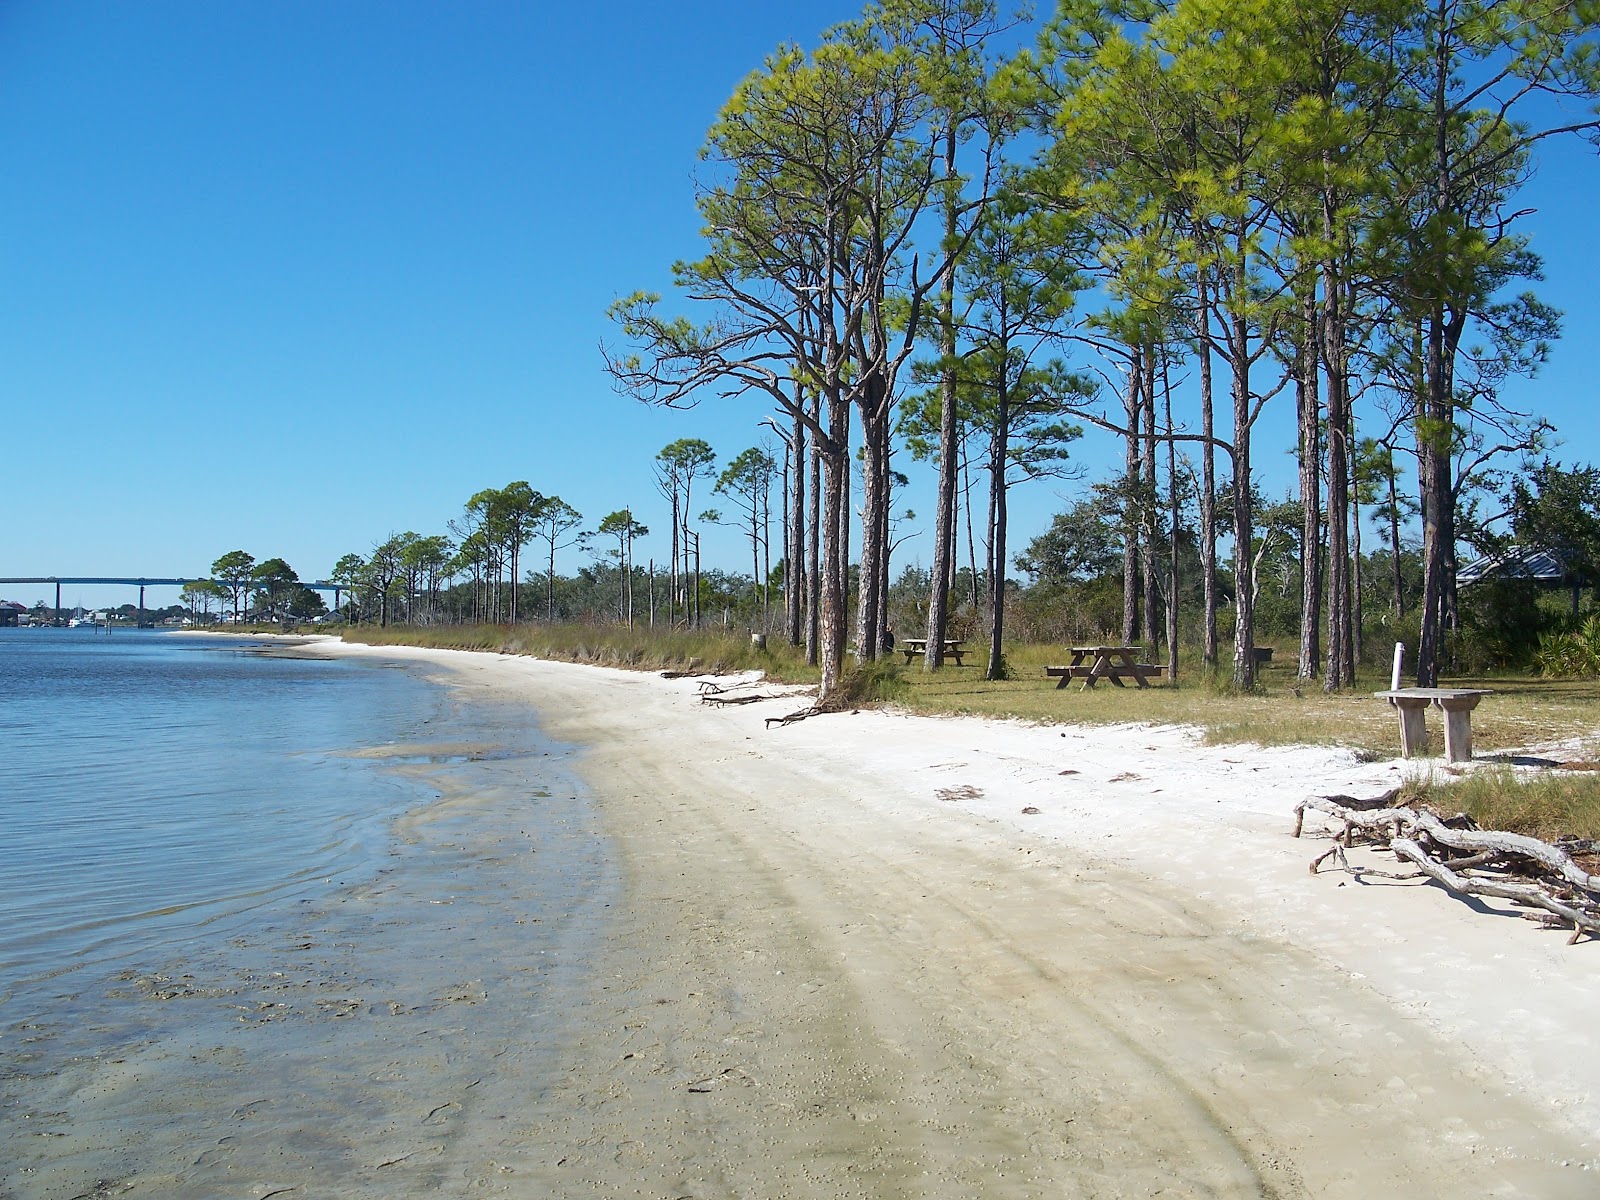 Pencil in Pensacola, FL for Your Next Active Vacay